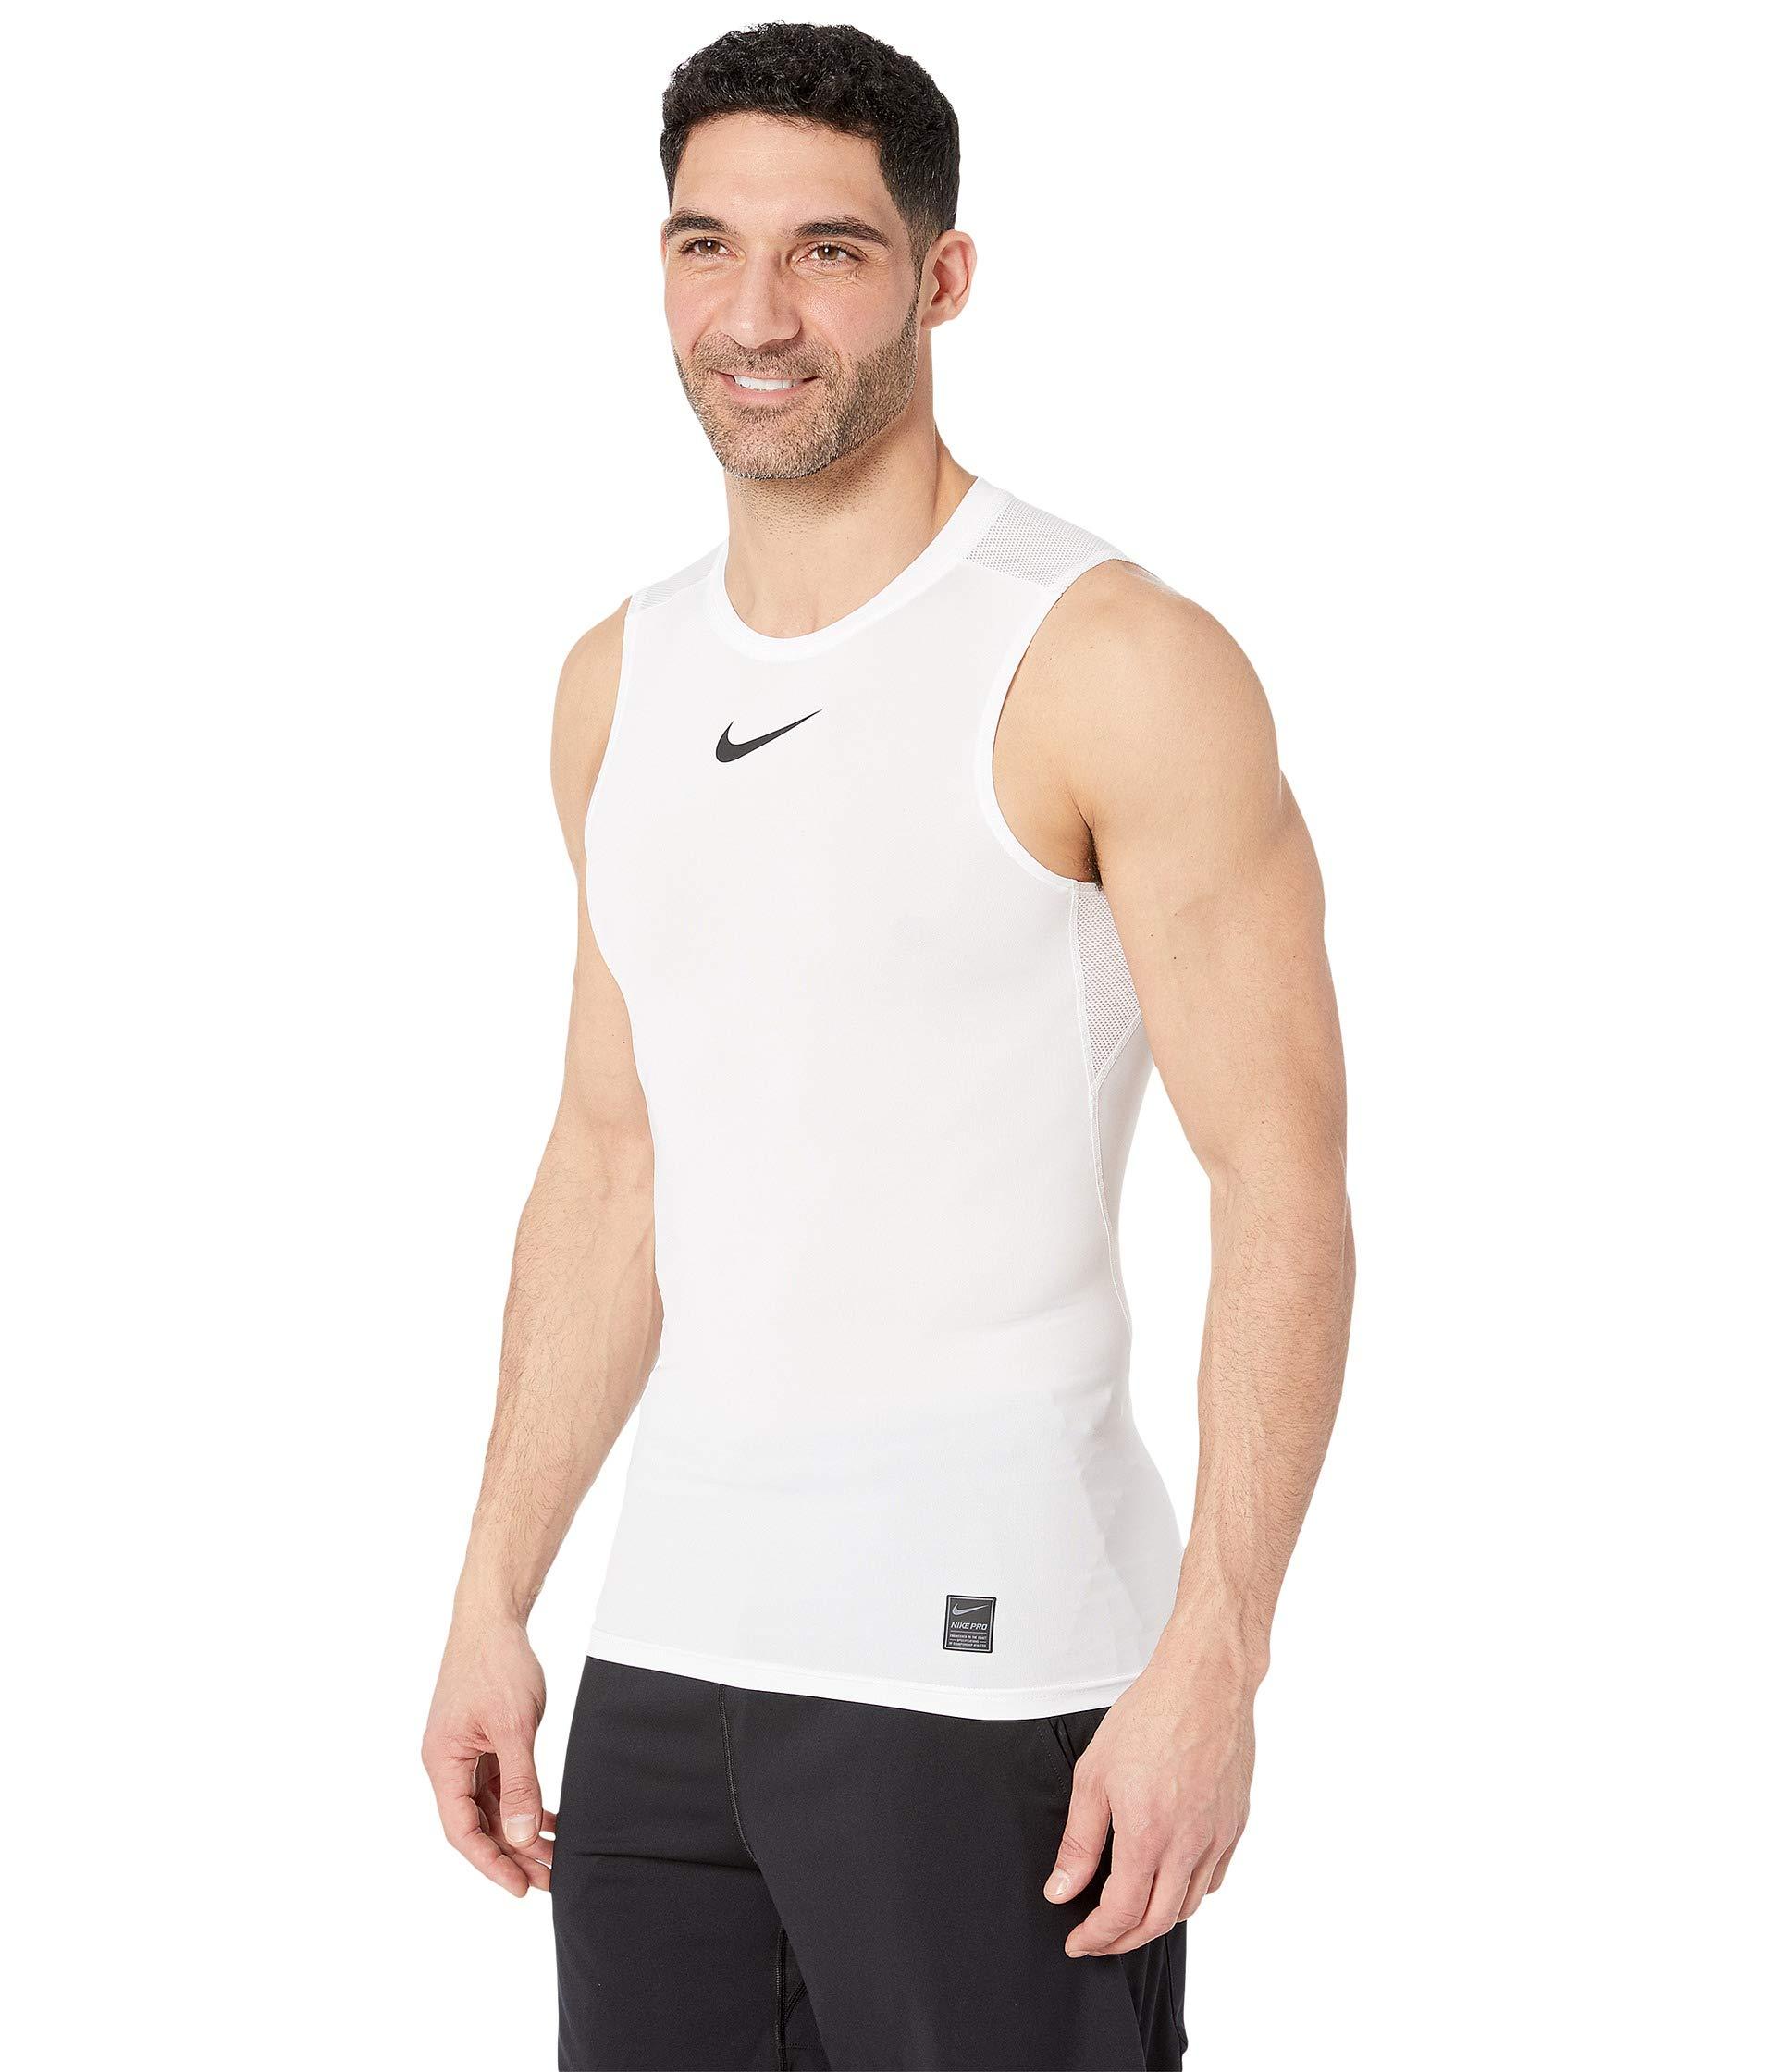 nike men's pro fitted sleeveless top